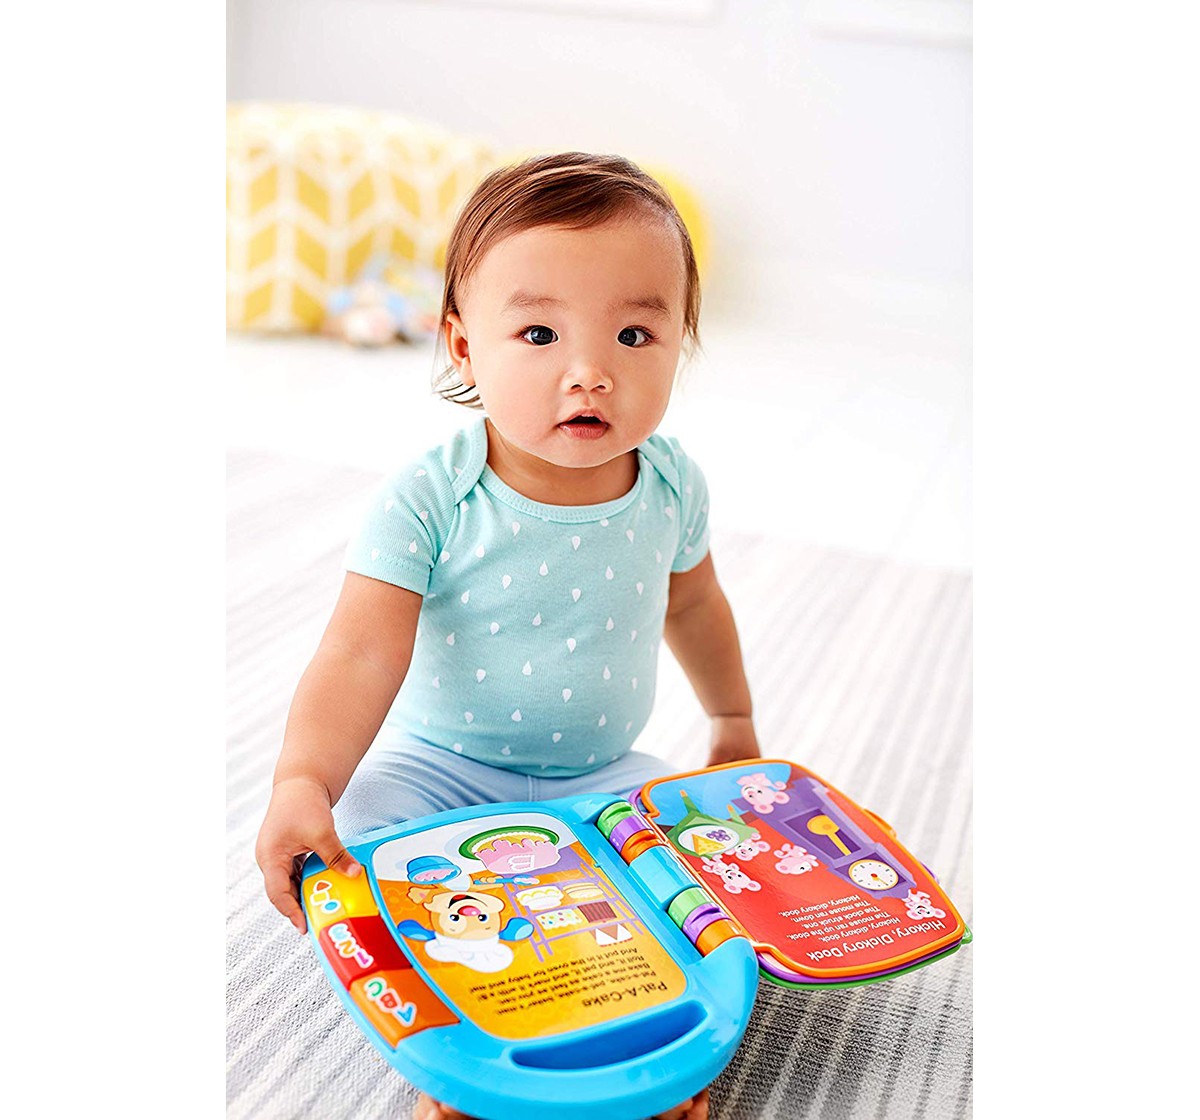 Fisher Price Storybook Rhymes Learning Toys for Kids age 6M+ 